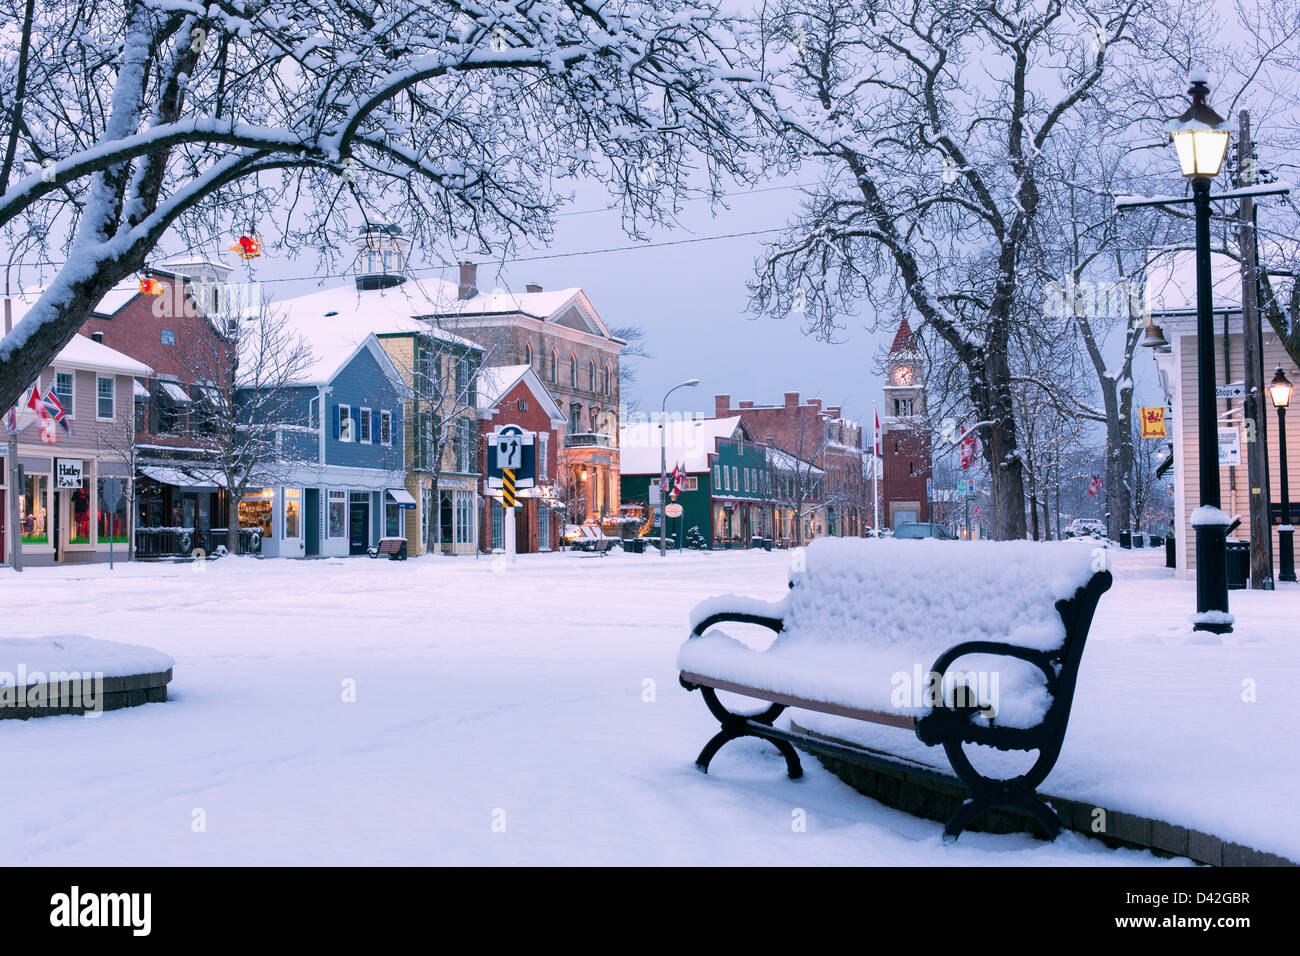 Canada, Ontario, Niagara-on-the-Lake, Queen Street, early winter morning, park bench covered in snow showing a main street with shops. Stock Photo